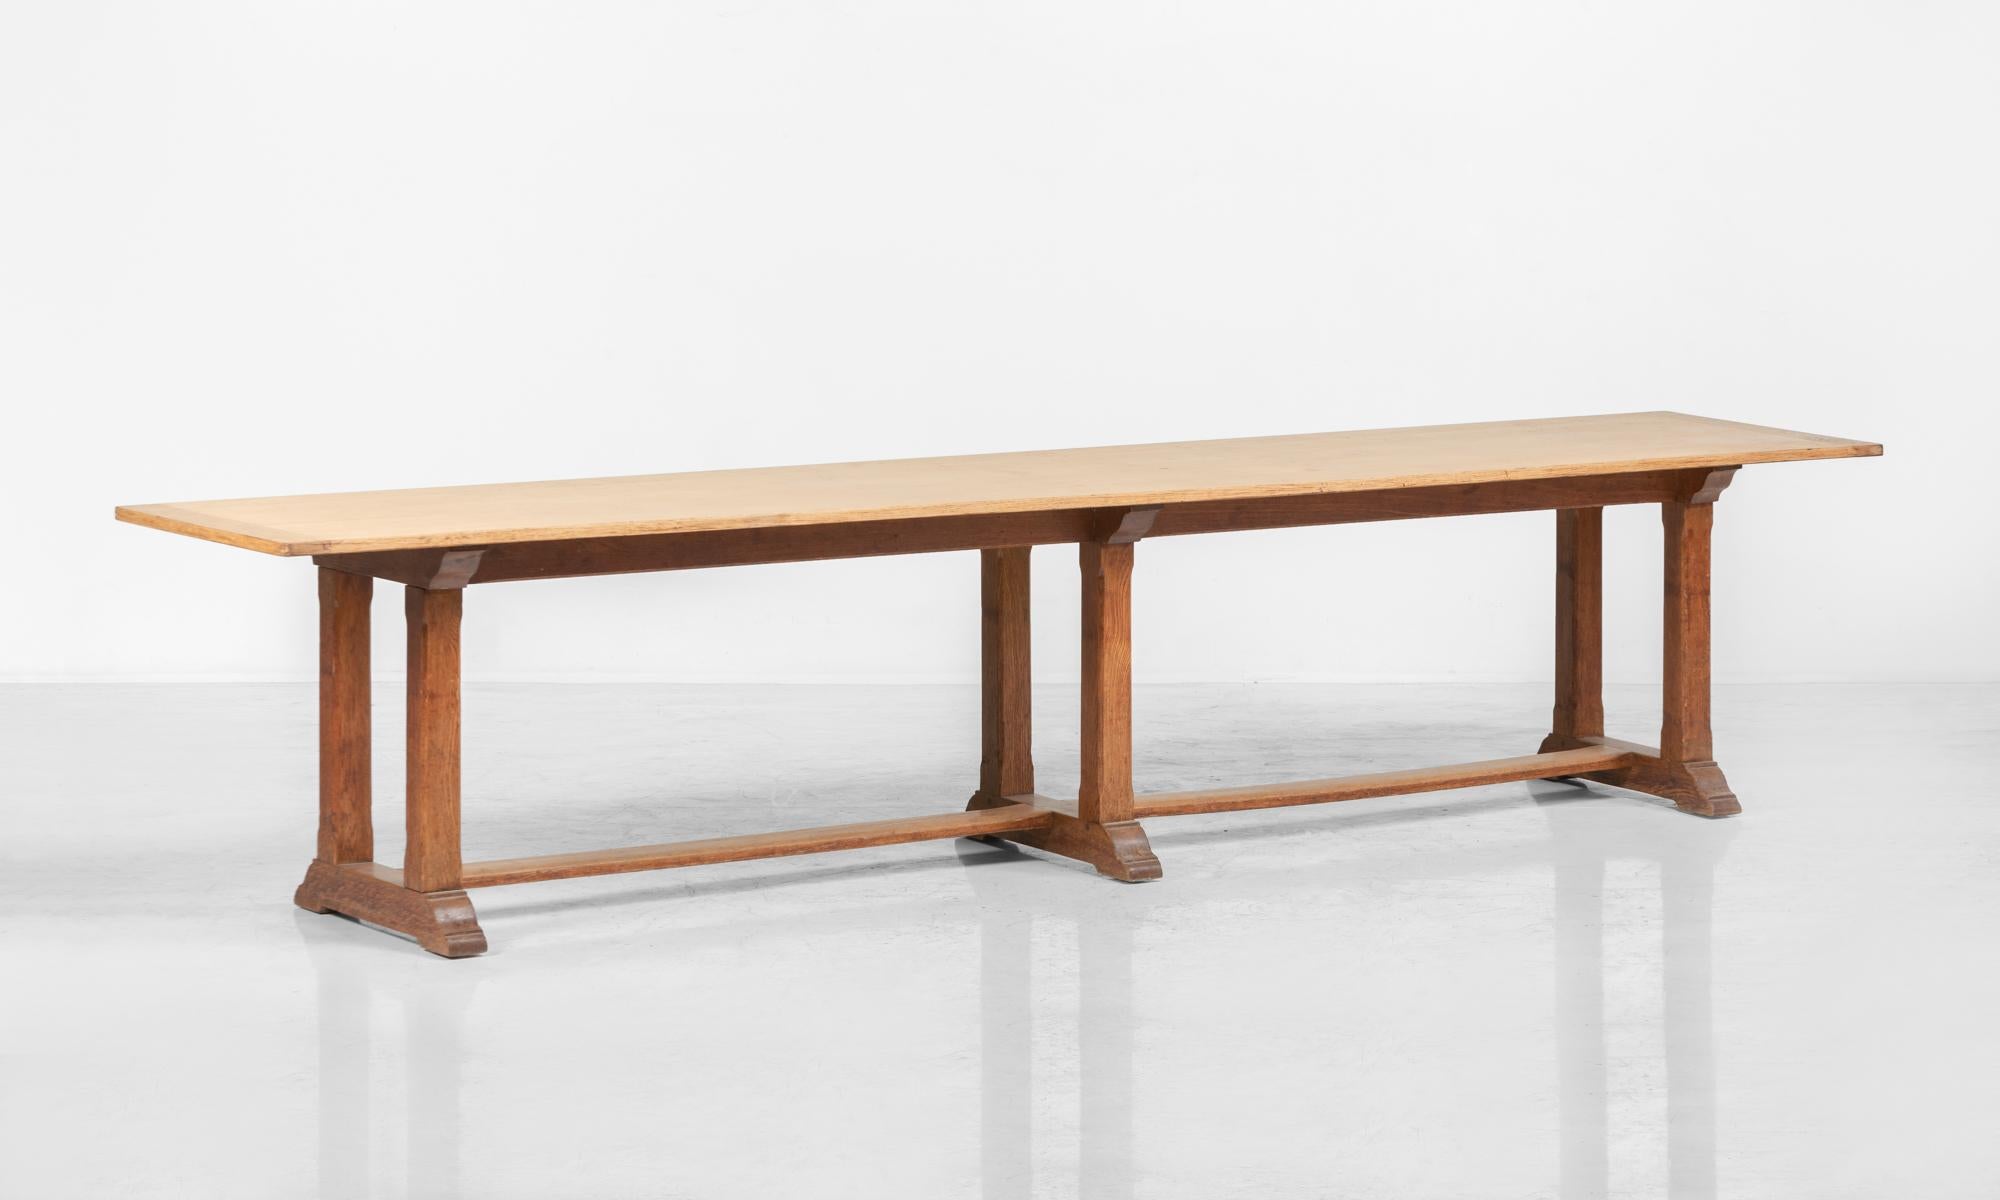 Edwardian oak refectory table, circa 1910

Scrubbed oak top with contrasting legs and stretcher. Originally made and used at Needler Hall in Yorkshire.